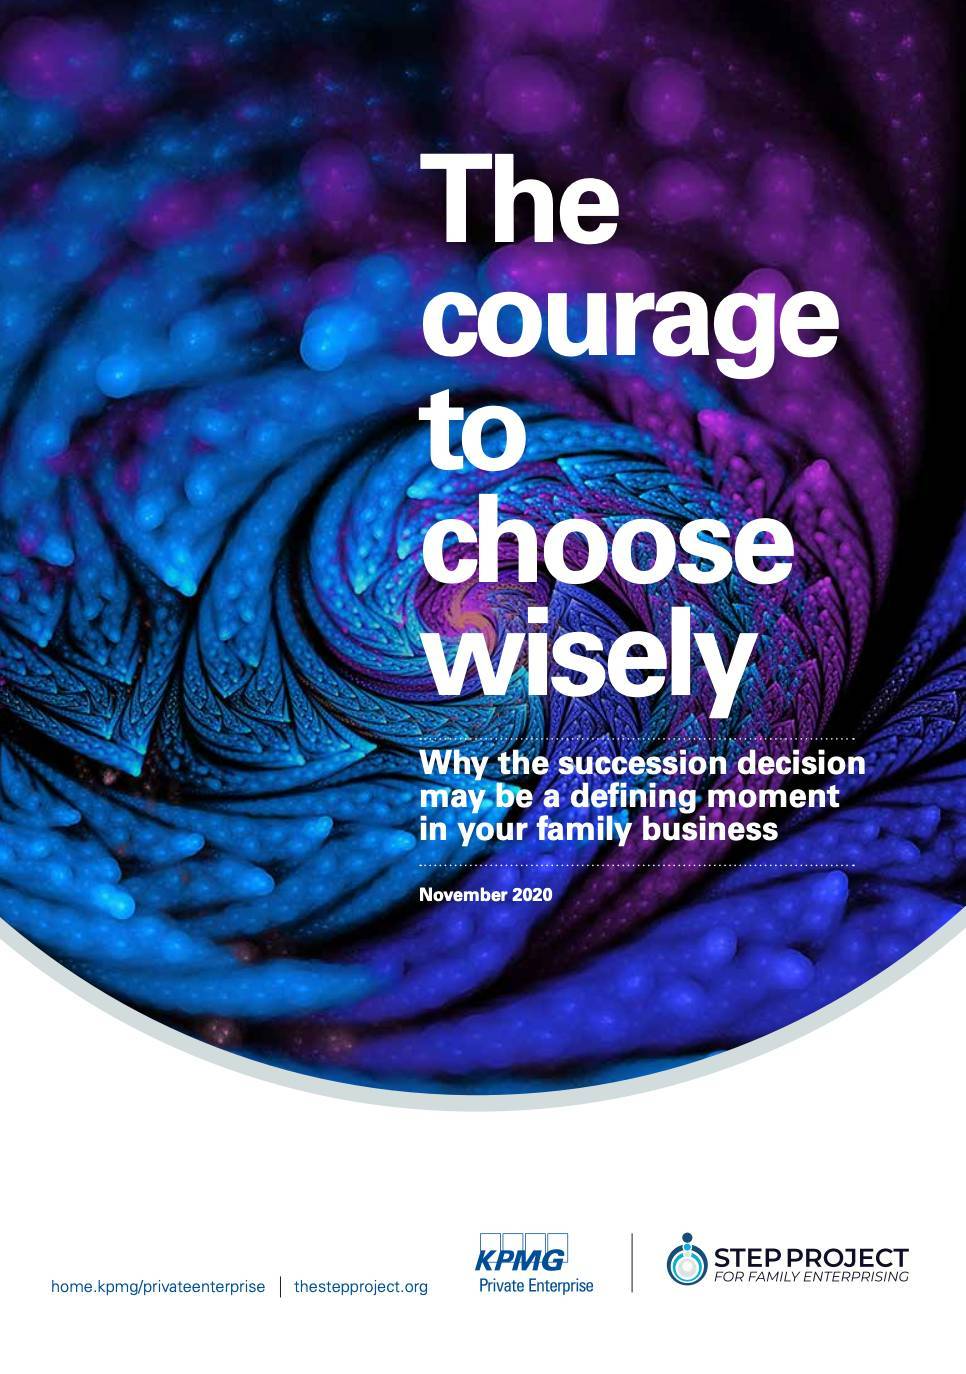 The Courage to Choose Wisely